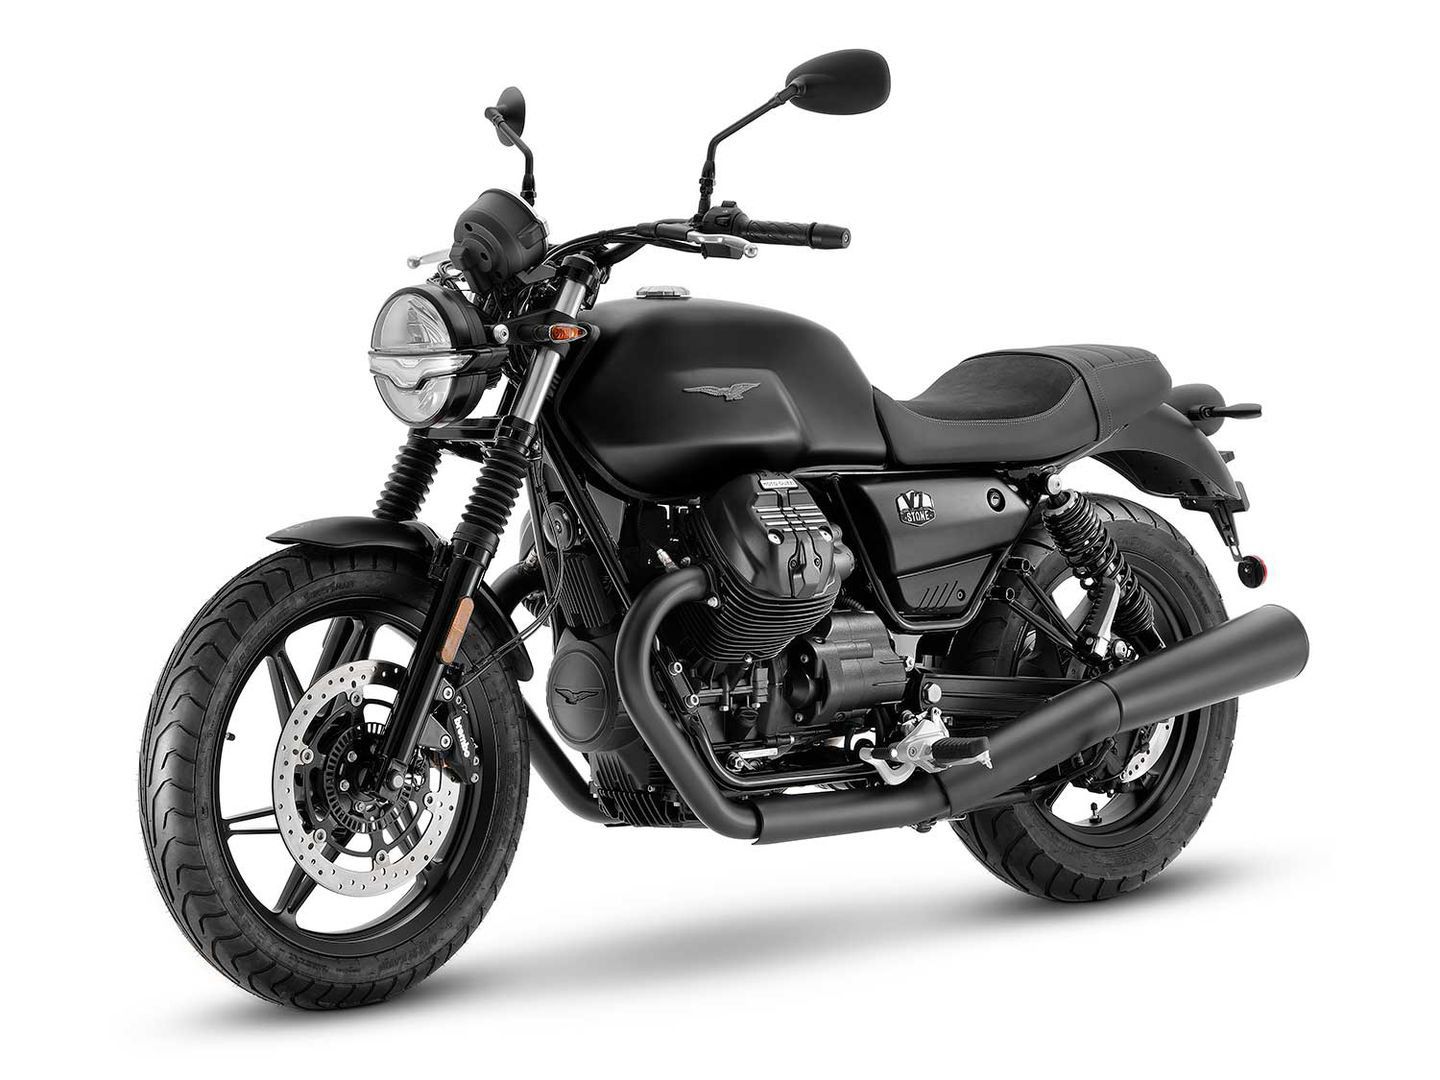 Moto Guzzi’s V7 Stone is a style choice, for riders who want a laid-back, capable, and head-turning machine.